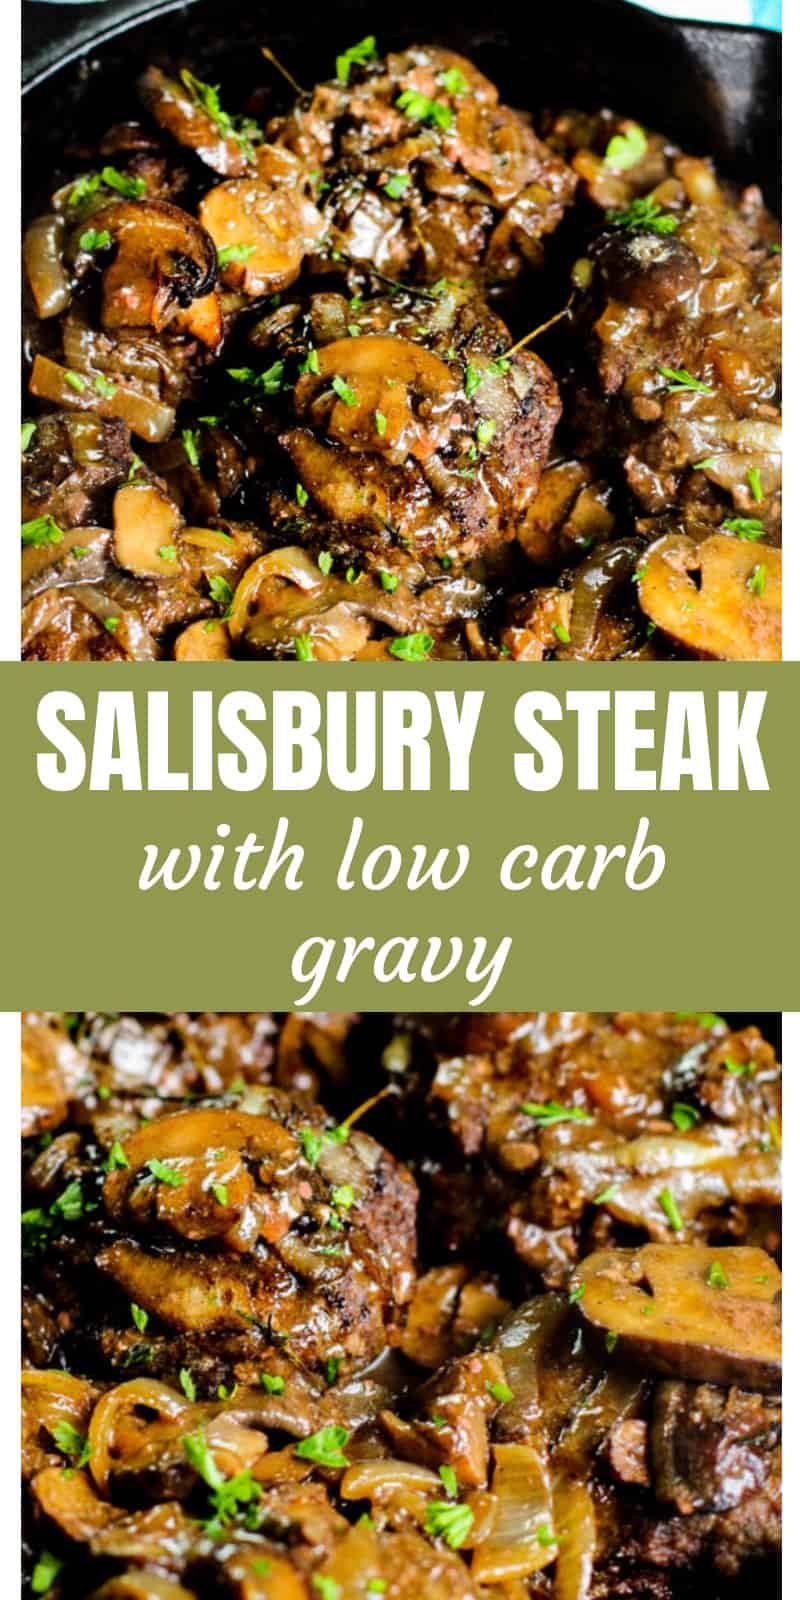 Looking for a keto friendly salisbury steak recipe with low carb gravy? You have to try this one! The low carb gravy recipe with mushrooms and onions is delicious!